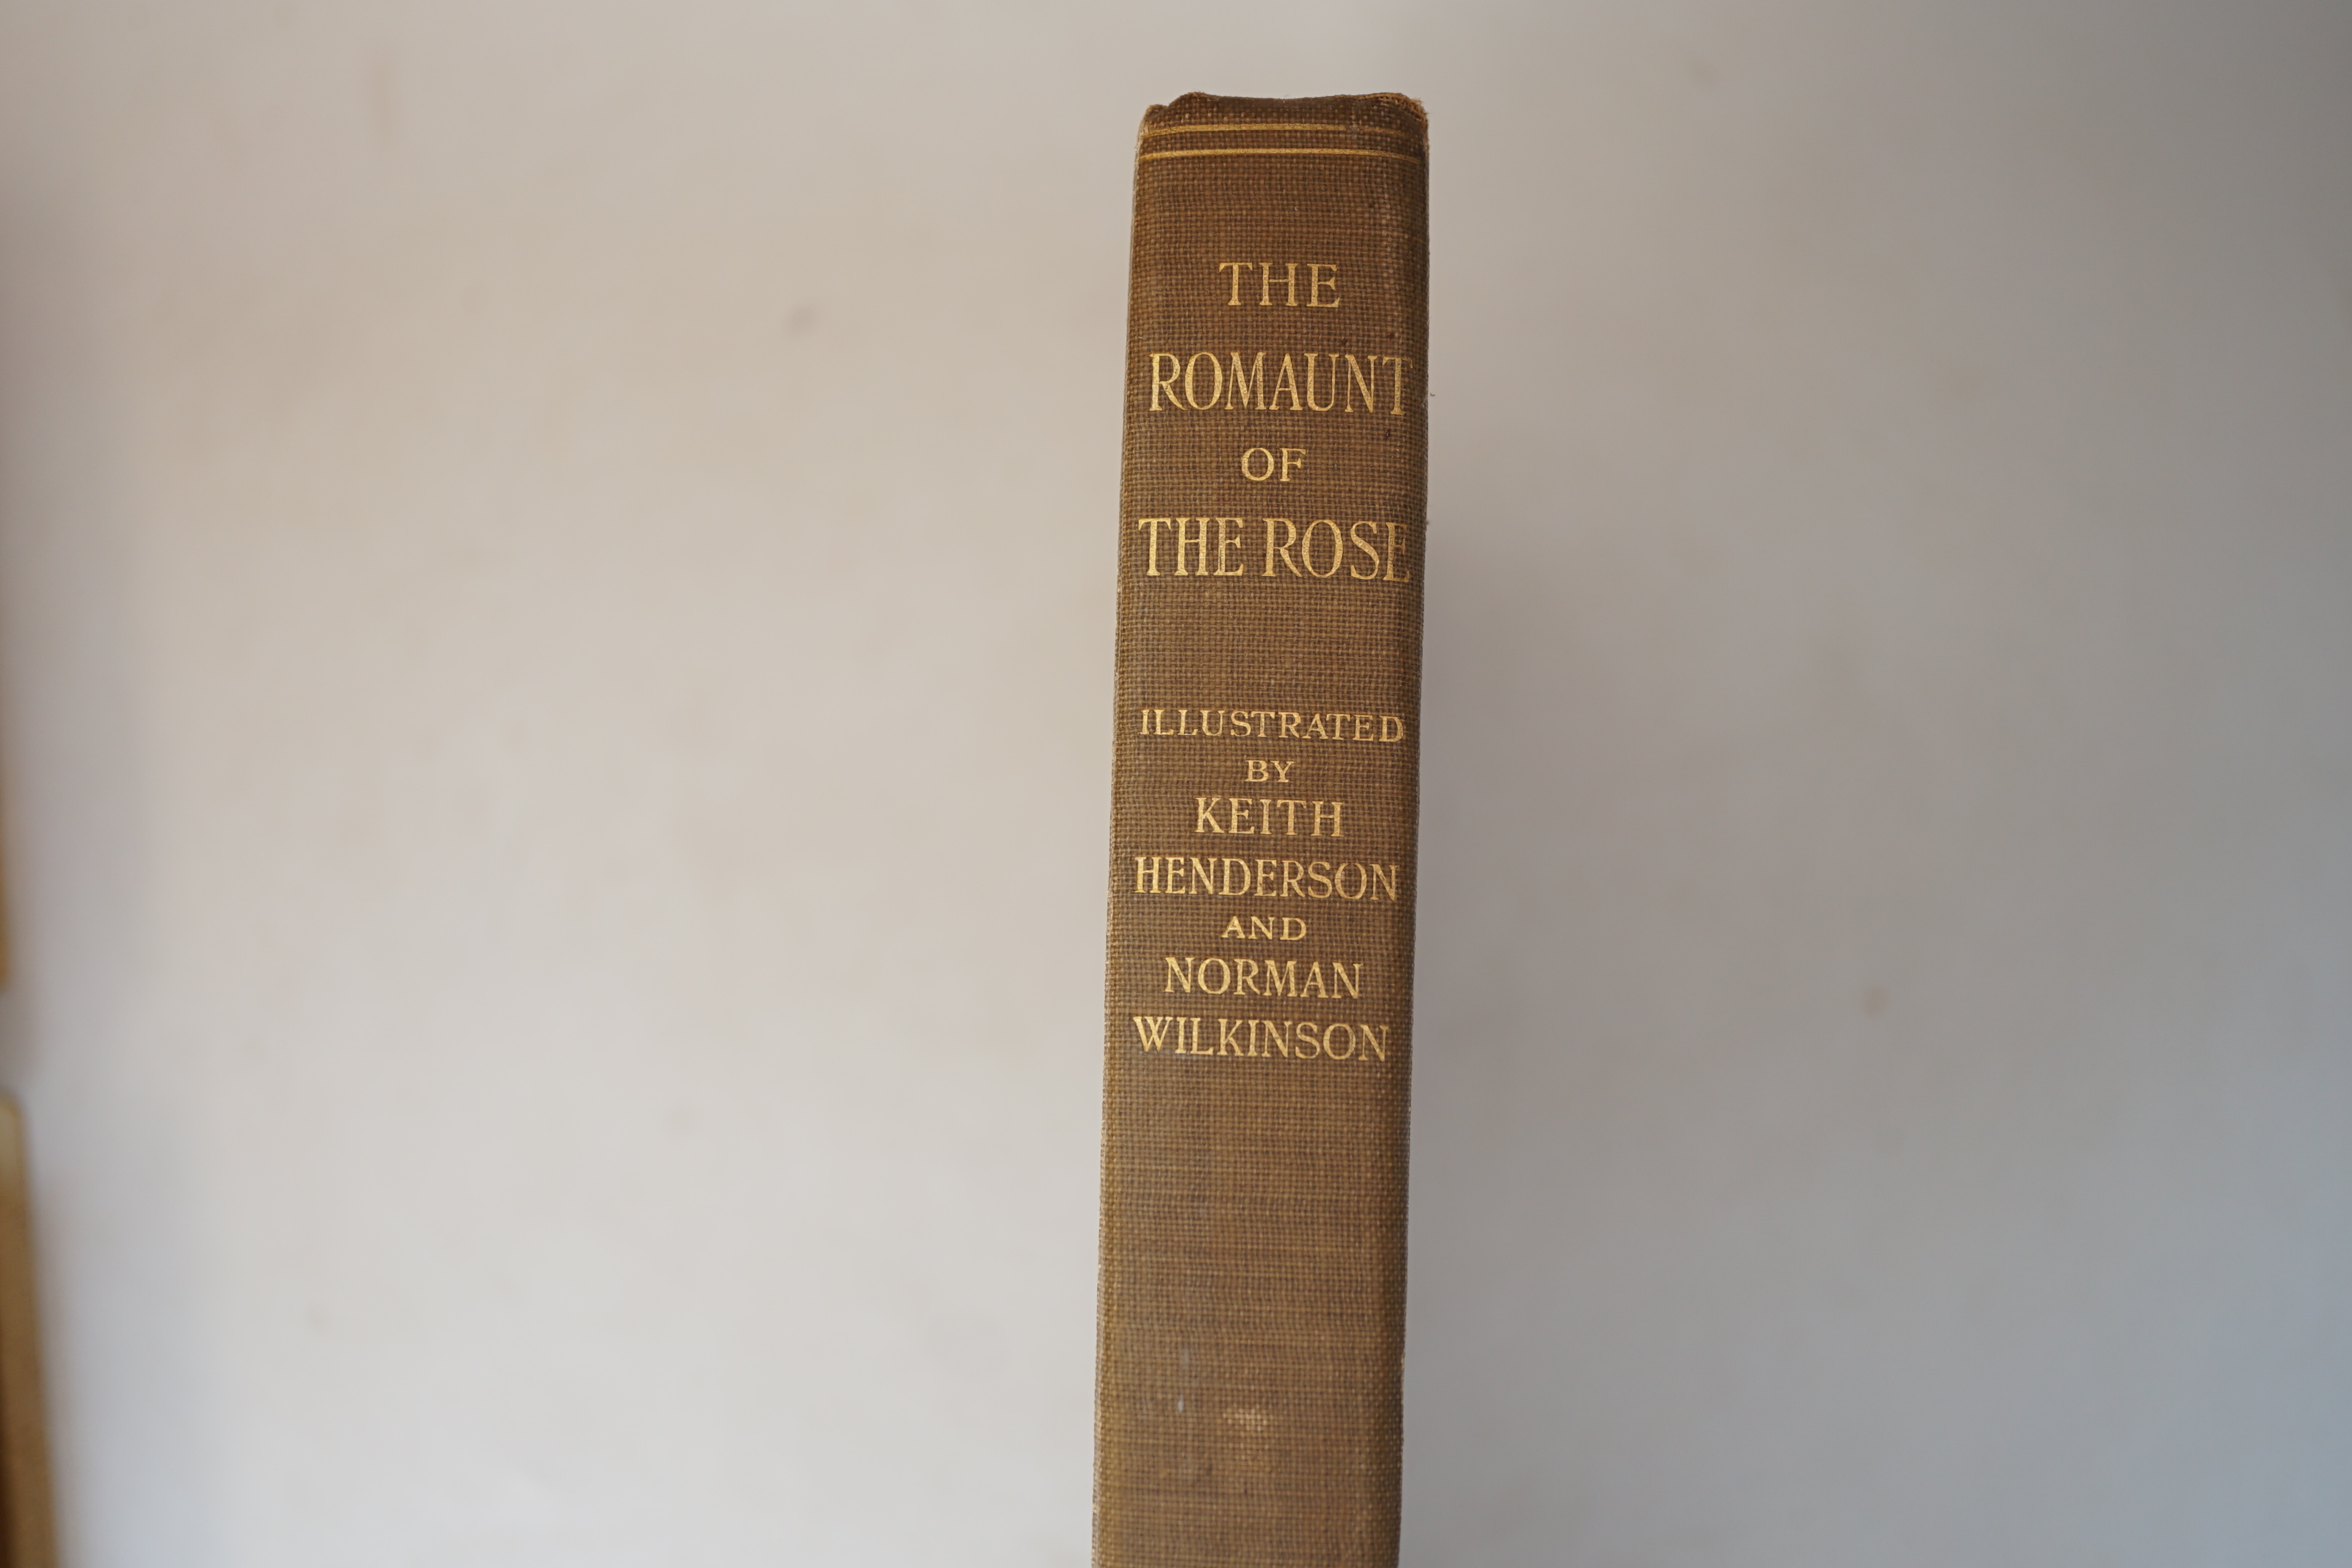 [Lorris, Guillaume de], Chaucer, Geoffrey (translator) - The Romaunt of the Rose, title and first page in red and black, 20 mounted colour plates by Keith Henderson and Norman Wilkinson, ink inscription on front free end